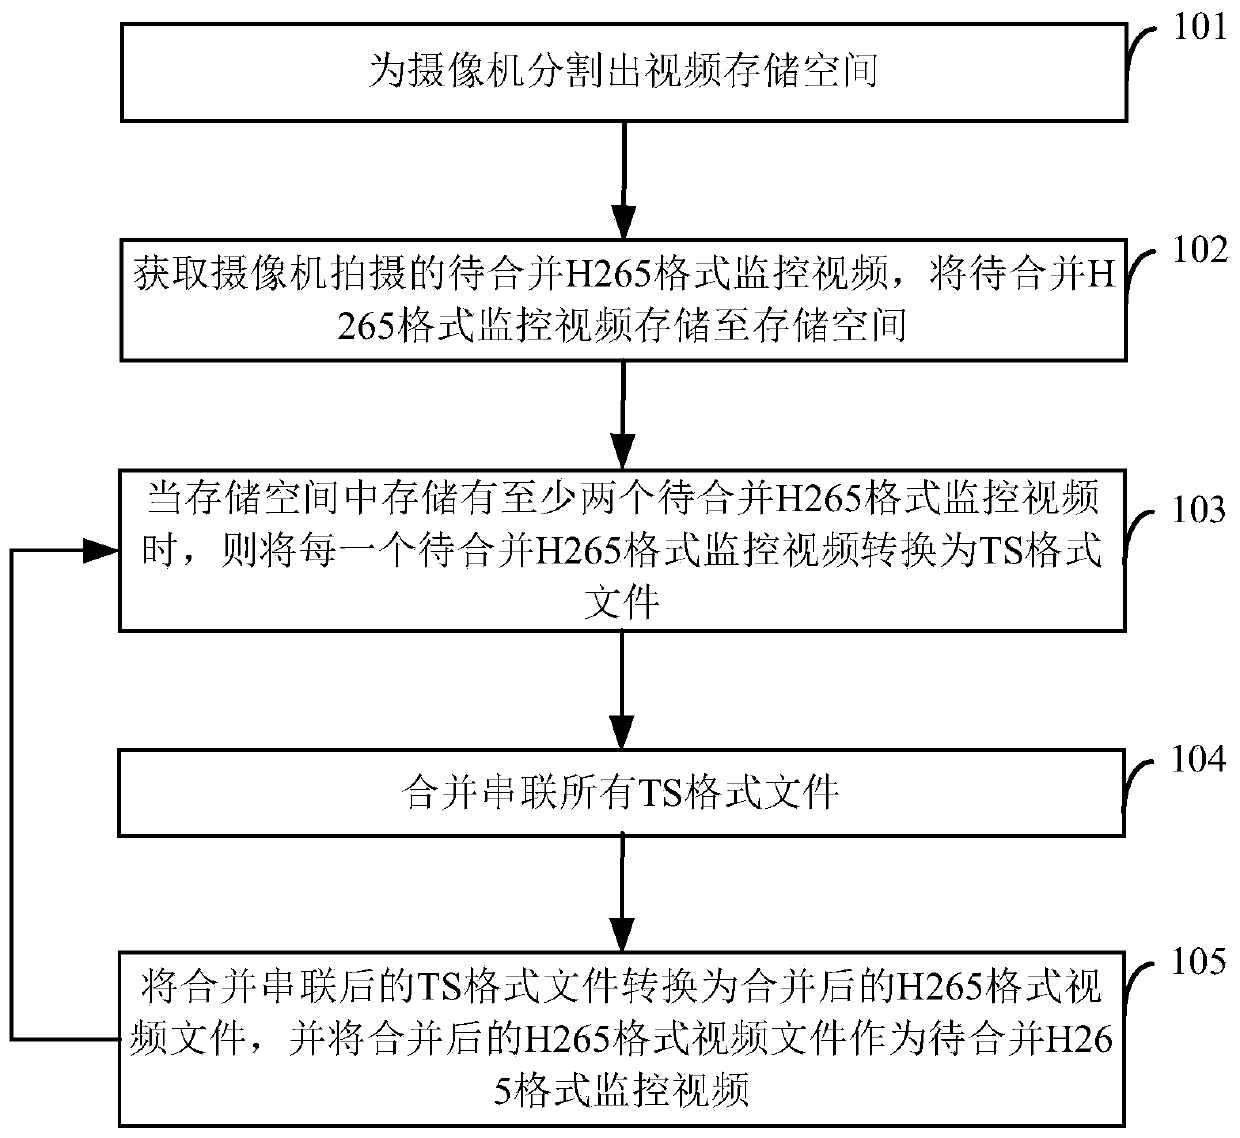 H265 format monitoring video merging method, device and system